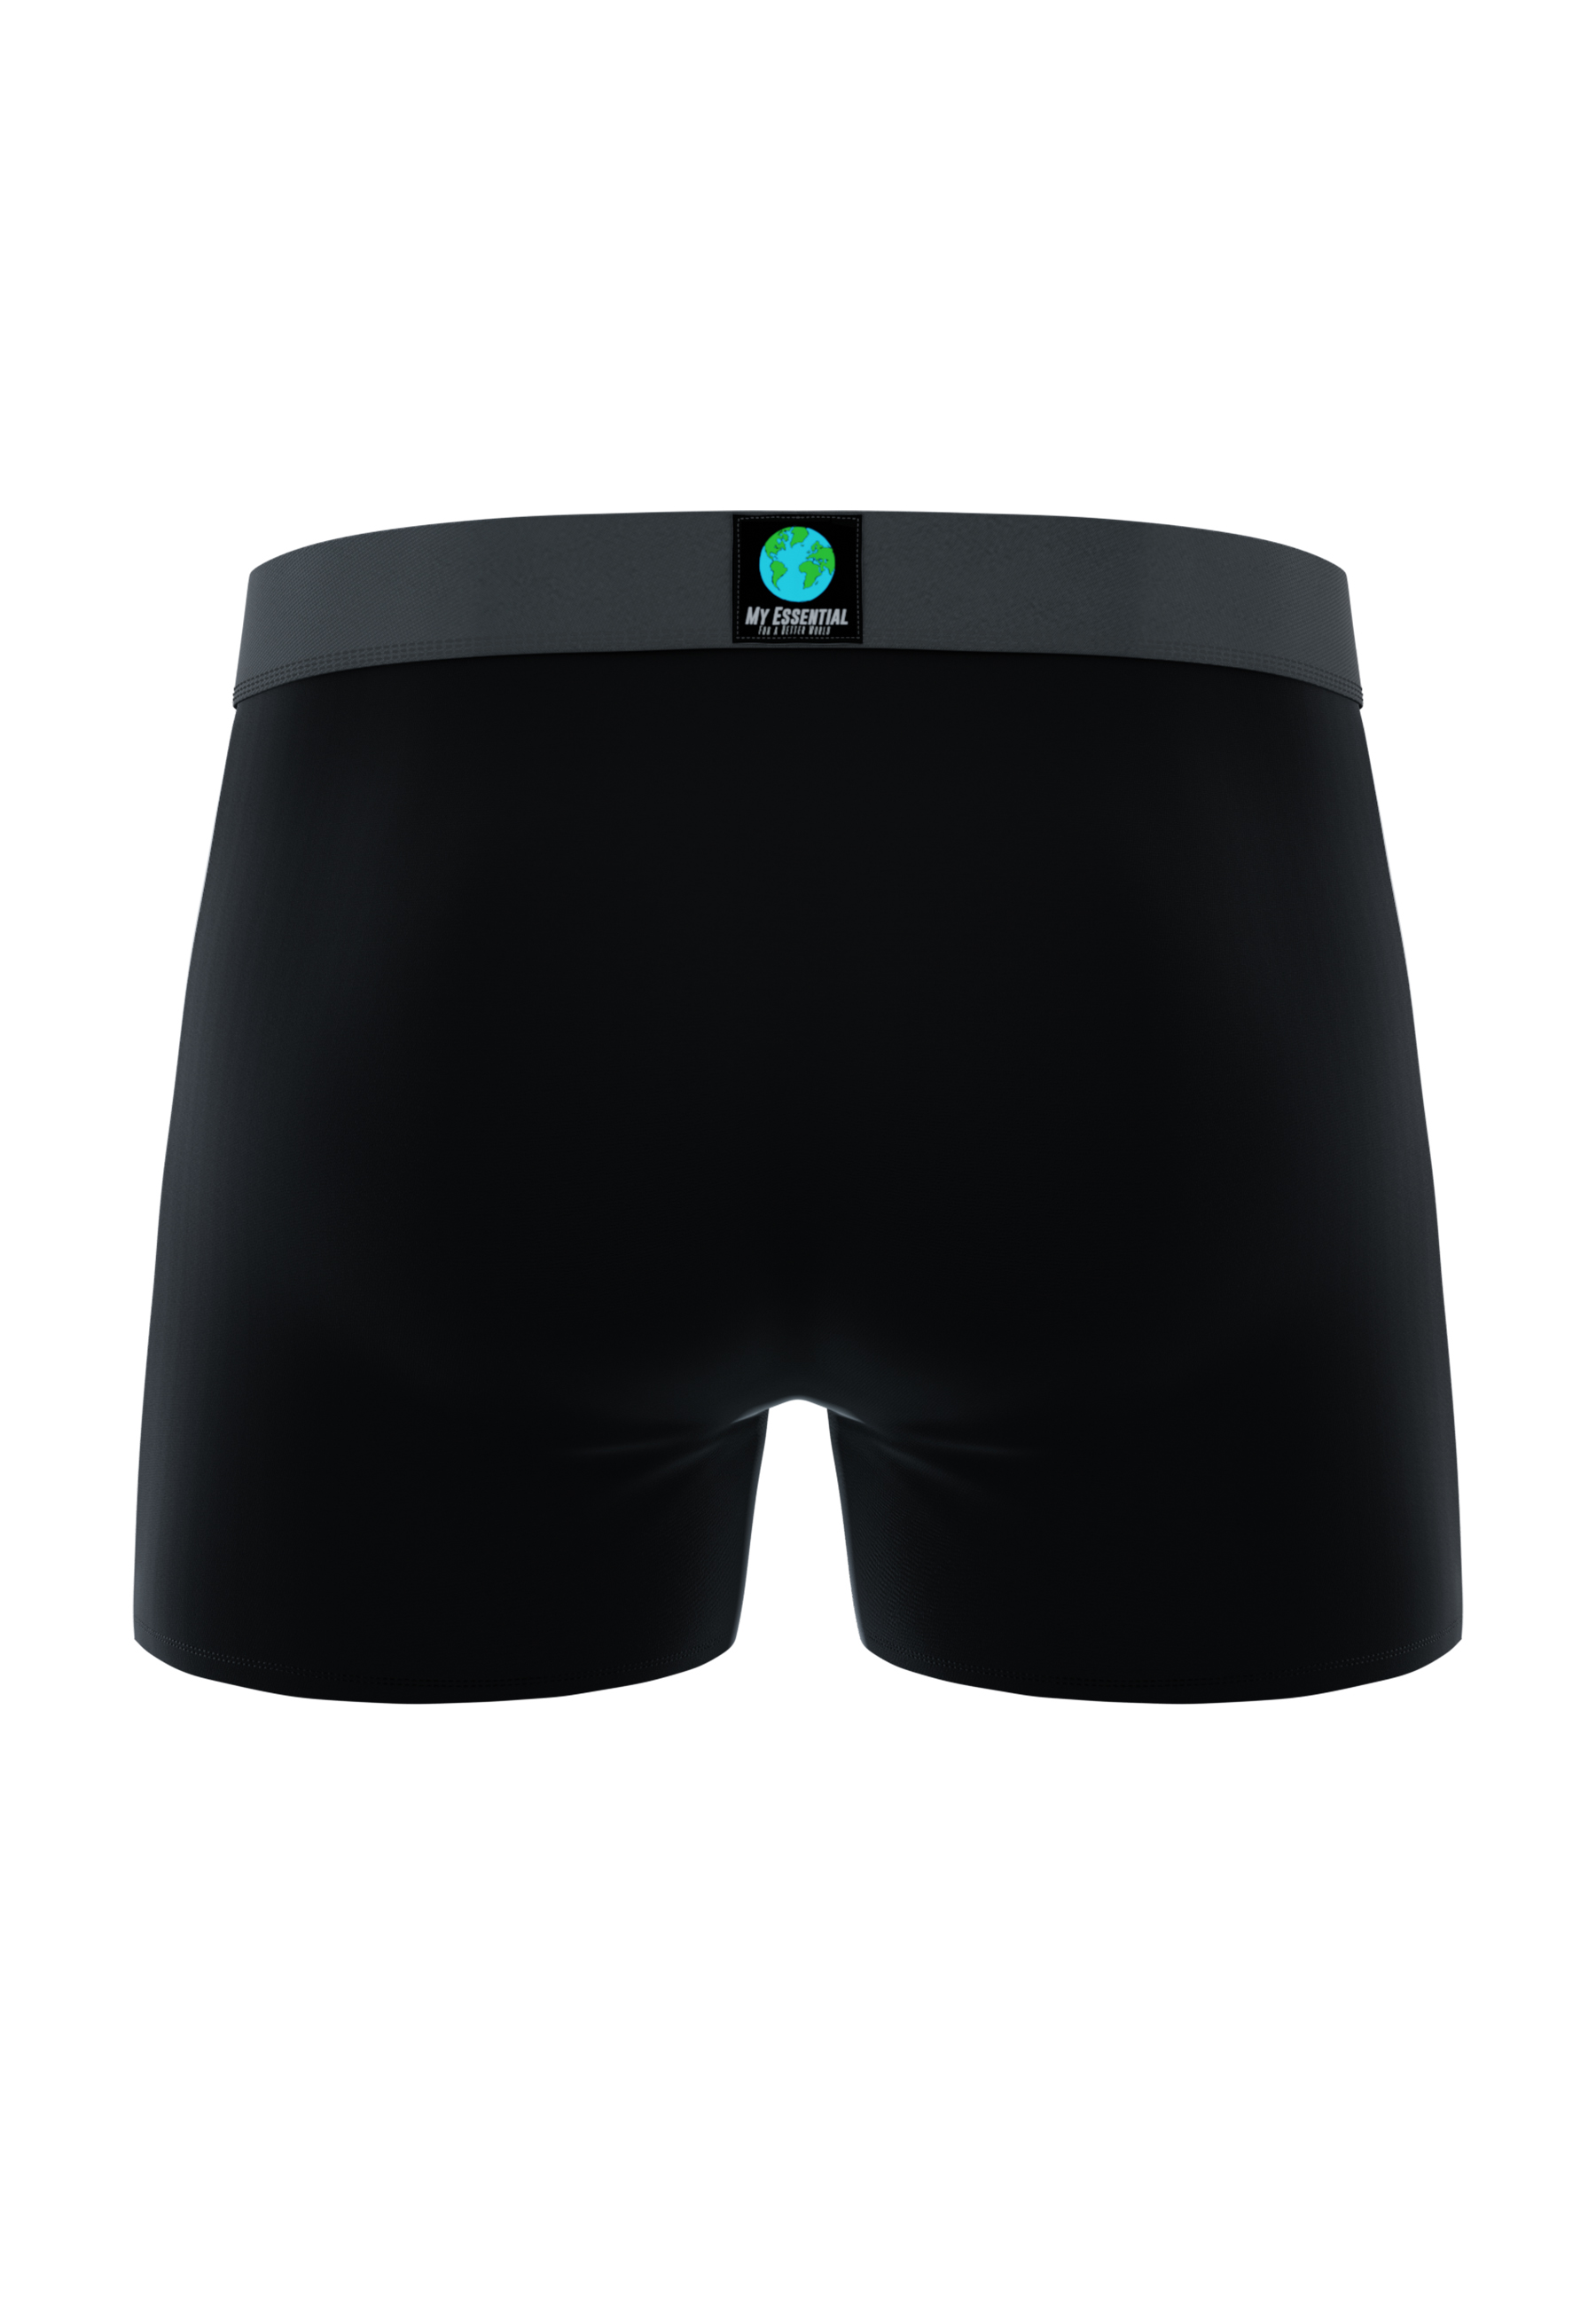 MY ESSENTIAL CLOTHING 3-Pack Boxershorts all black S